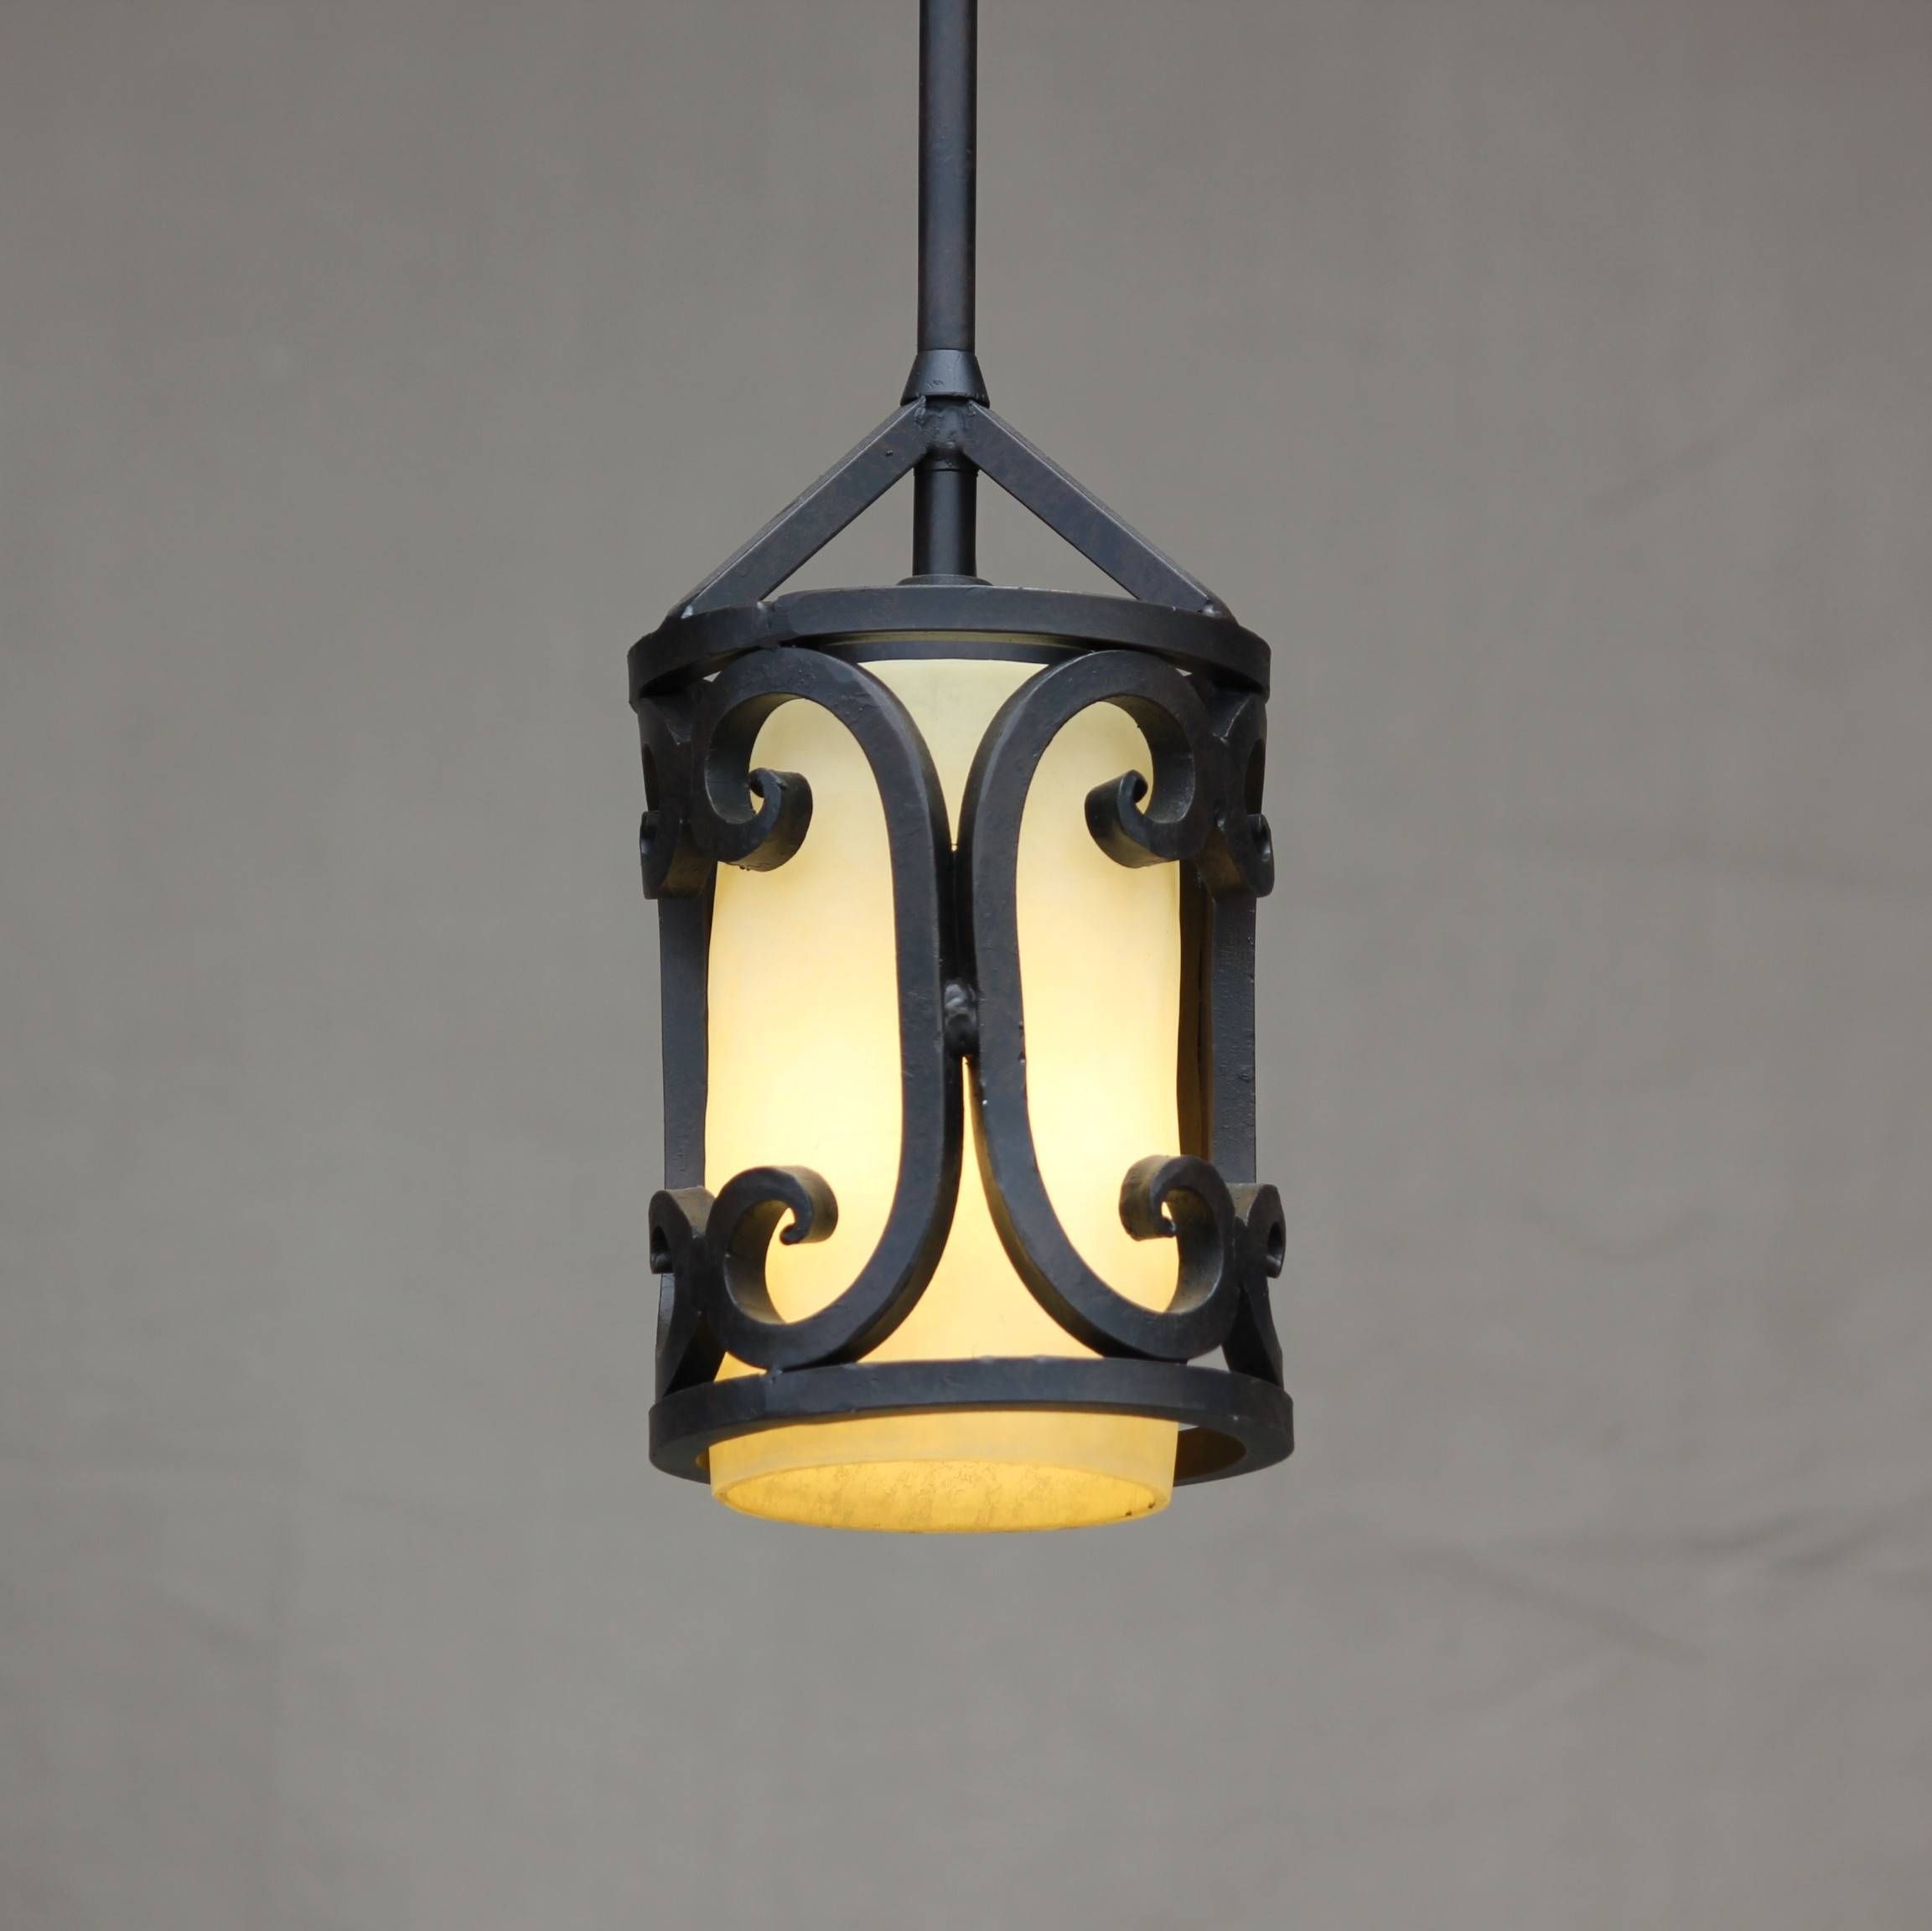 Amazing Of Wrought Iron Pendant Light Related To House Decor For Wrought Iron Kitchen Lights Fixtures (View 5 of 15)